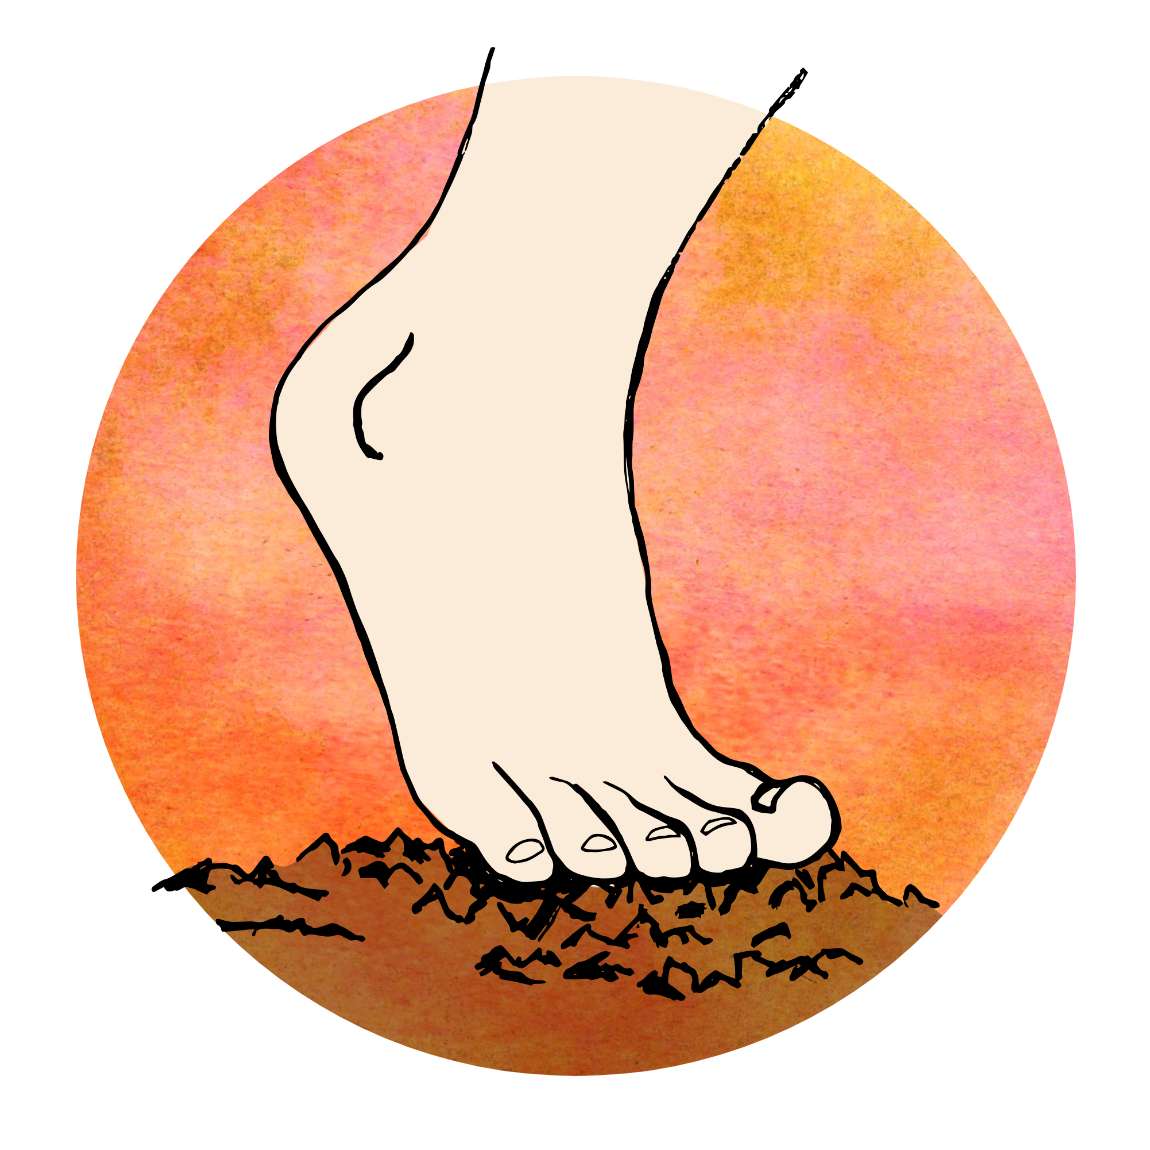 An illustration of a bare foot treading on rough ground against a background of orange and pink hues.